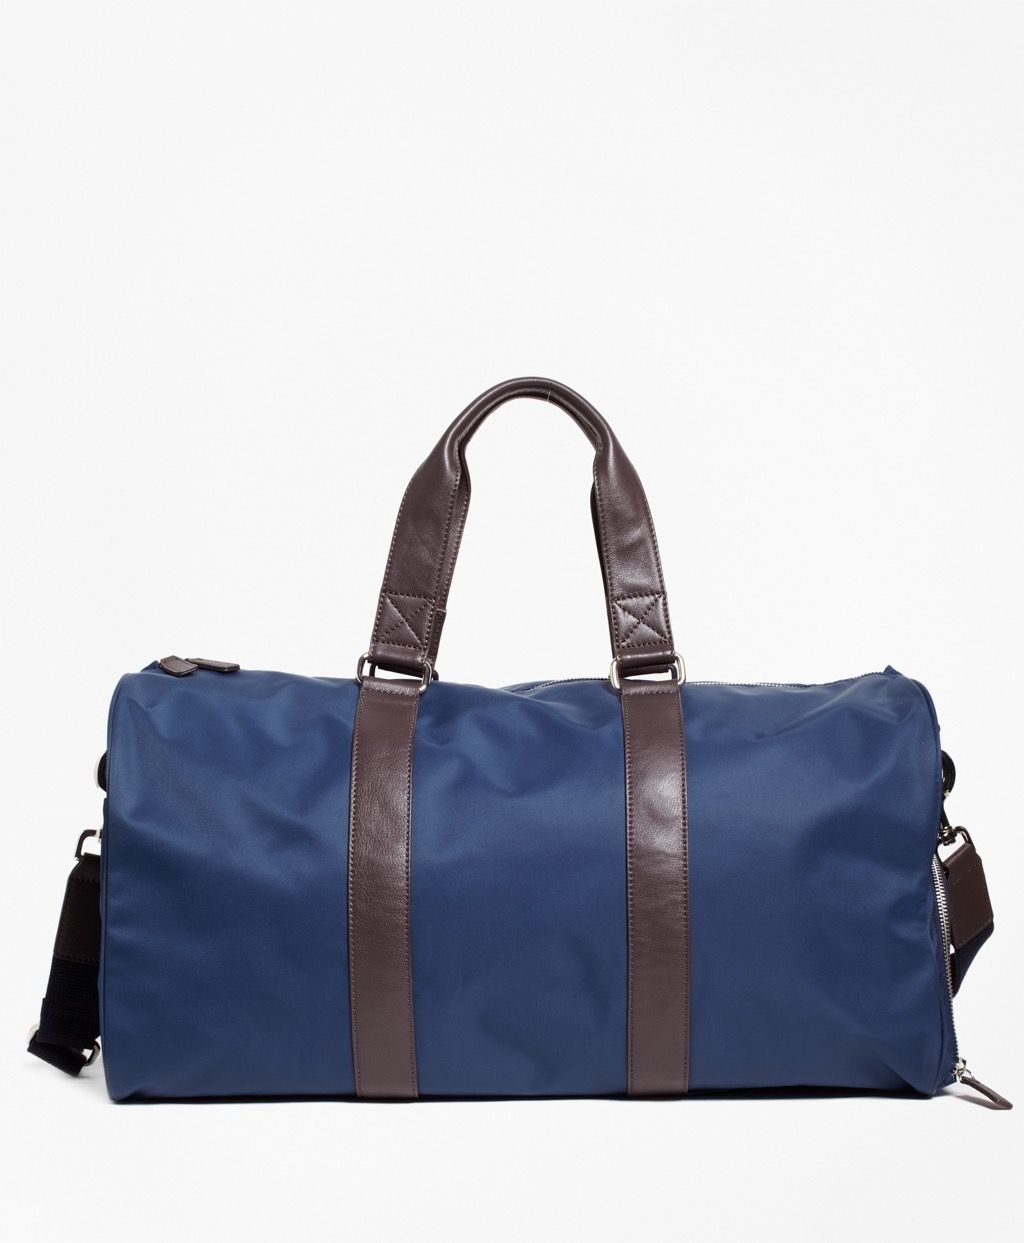 buffs brothers duffle